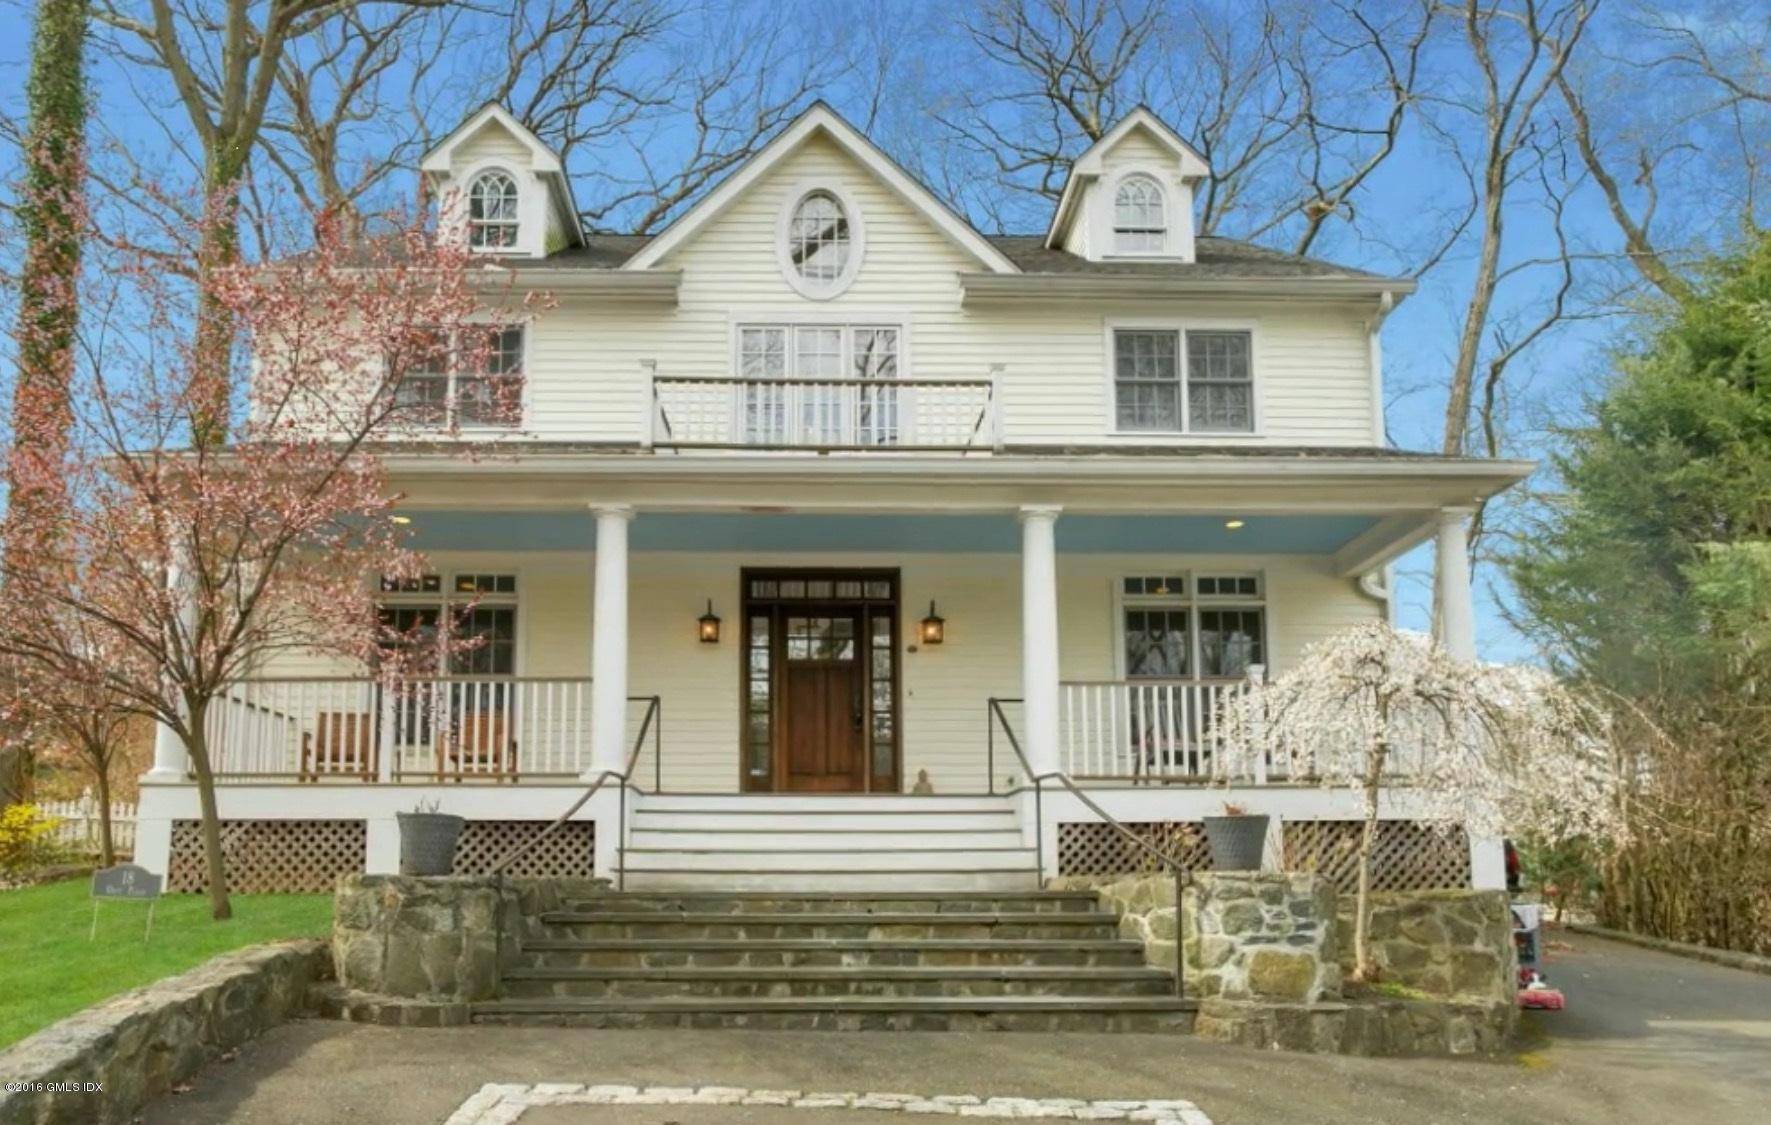 Modern Center Hall Colonial in a convenient Cos Cob location.